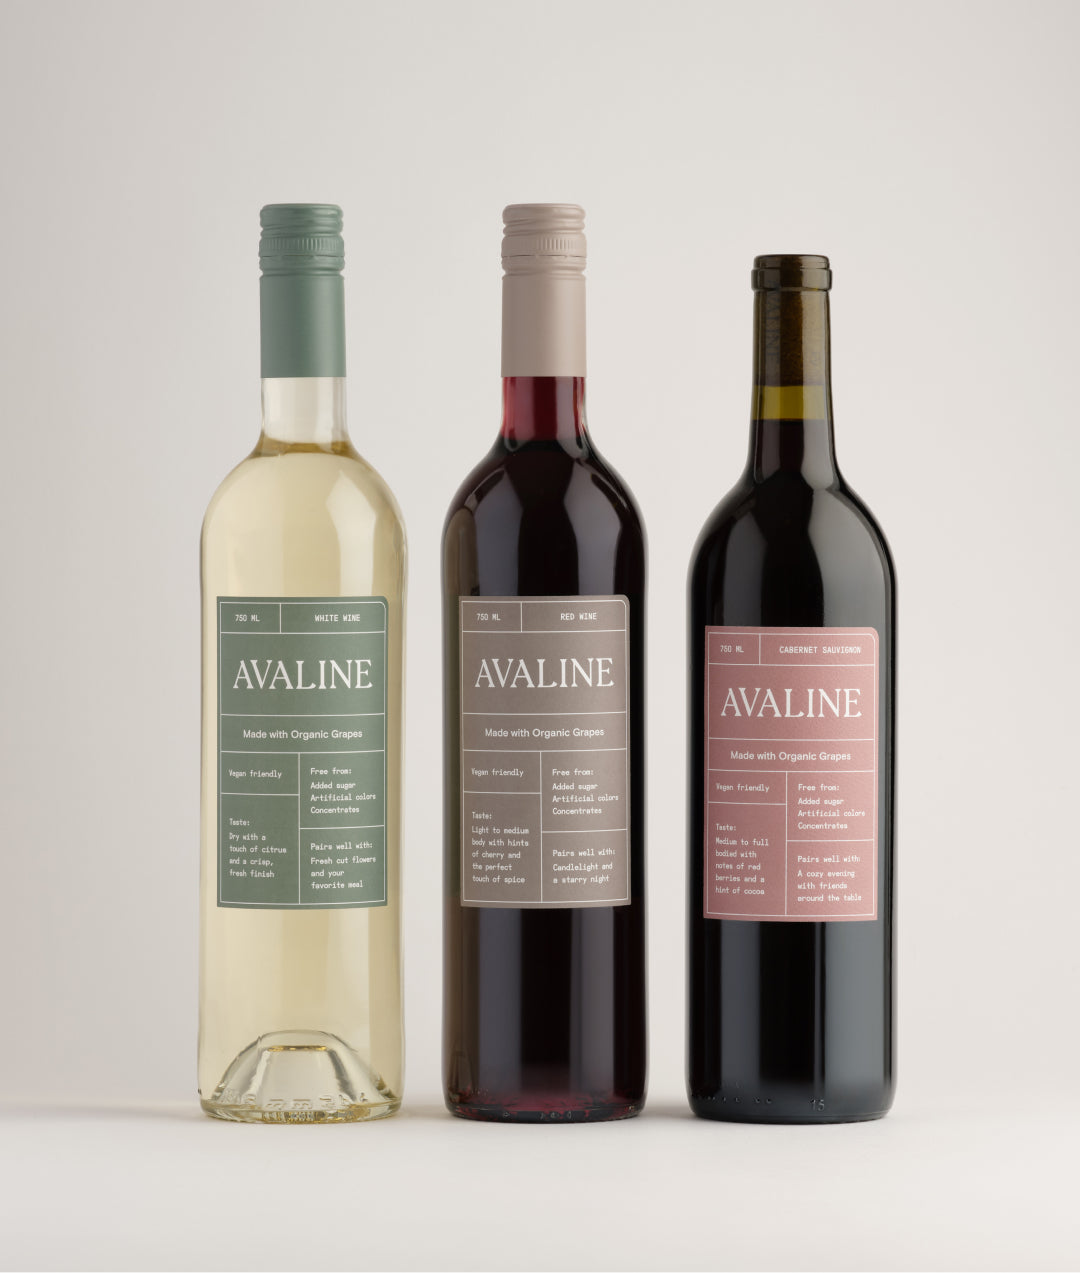 A lineup of wine bottles featuring Avaline White, Red, and Cabernet Sauvignon against a white background.